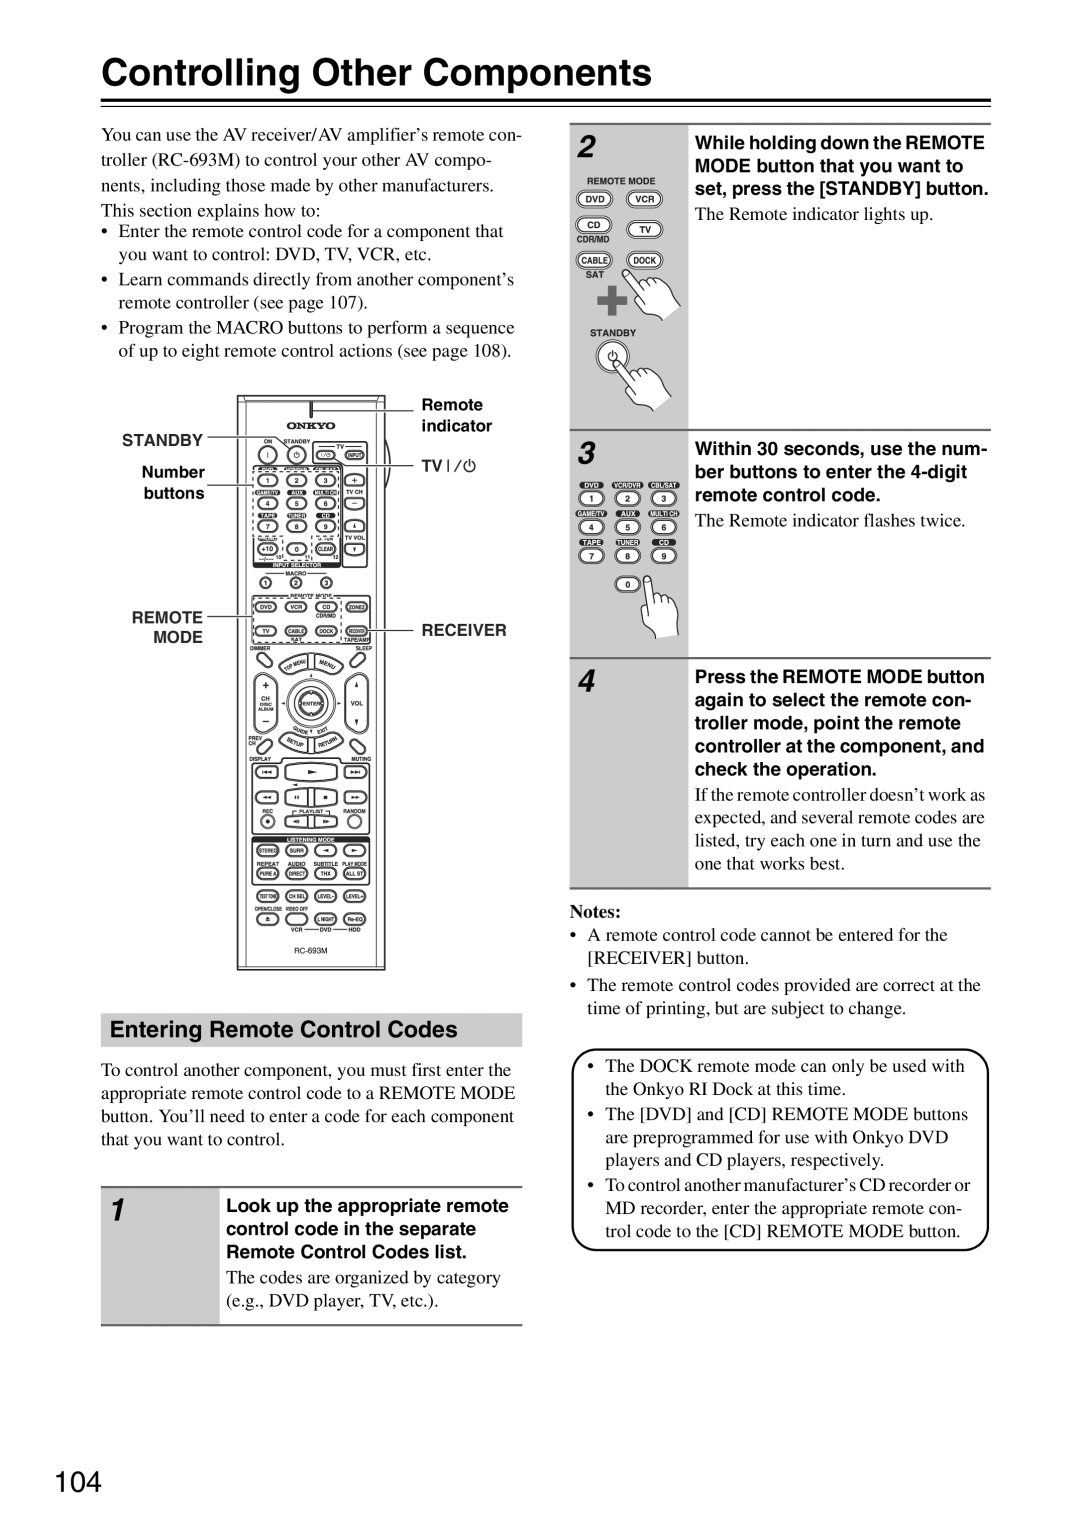 Onkyo TX-SA705 instruction manual Controlling Other Components, Entering Remote Control Codes, Notes 